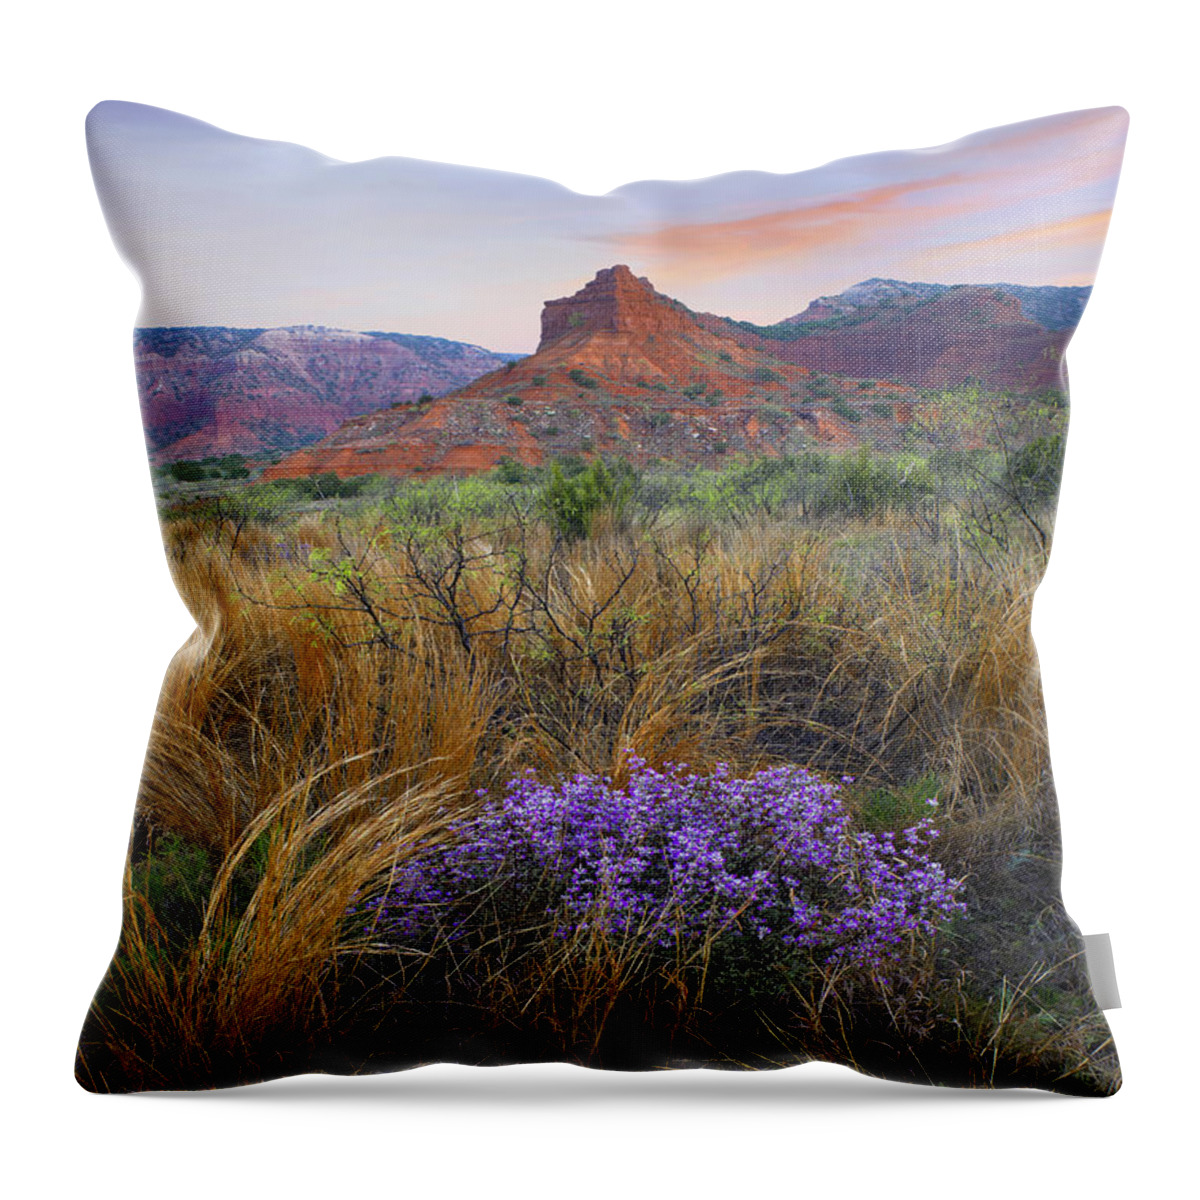 00176814 Throw Pillow featuring the photograph Caprock Canyons State Park Texas by Tim Fitzharris